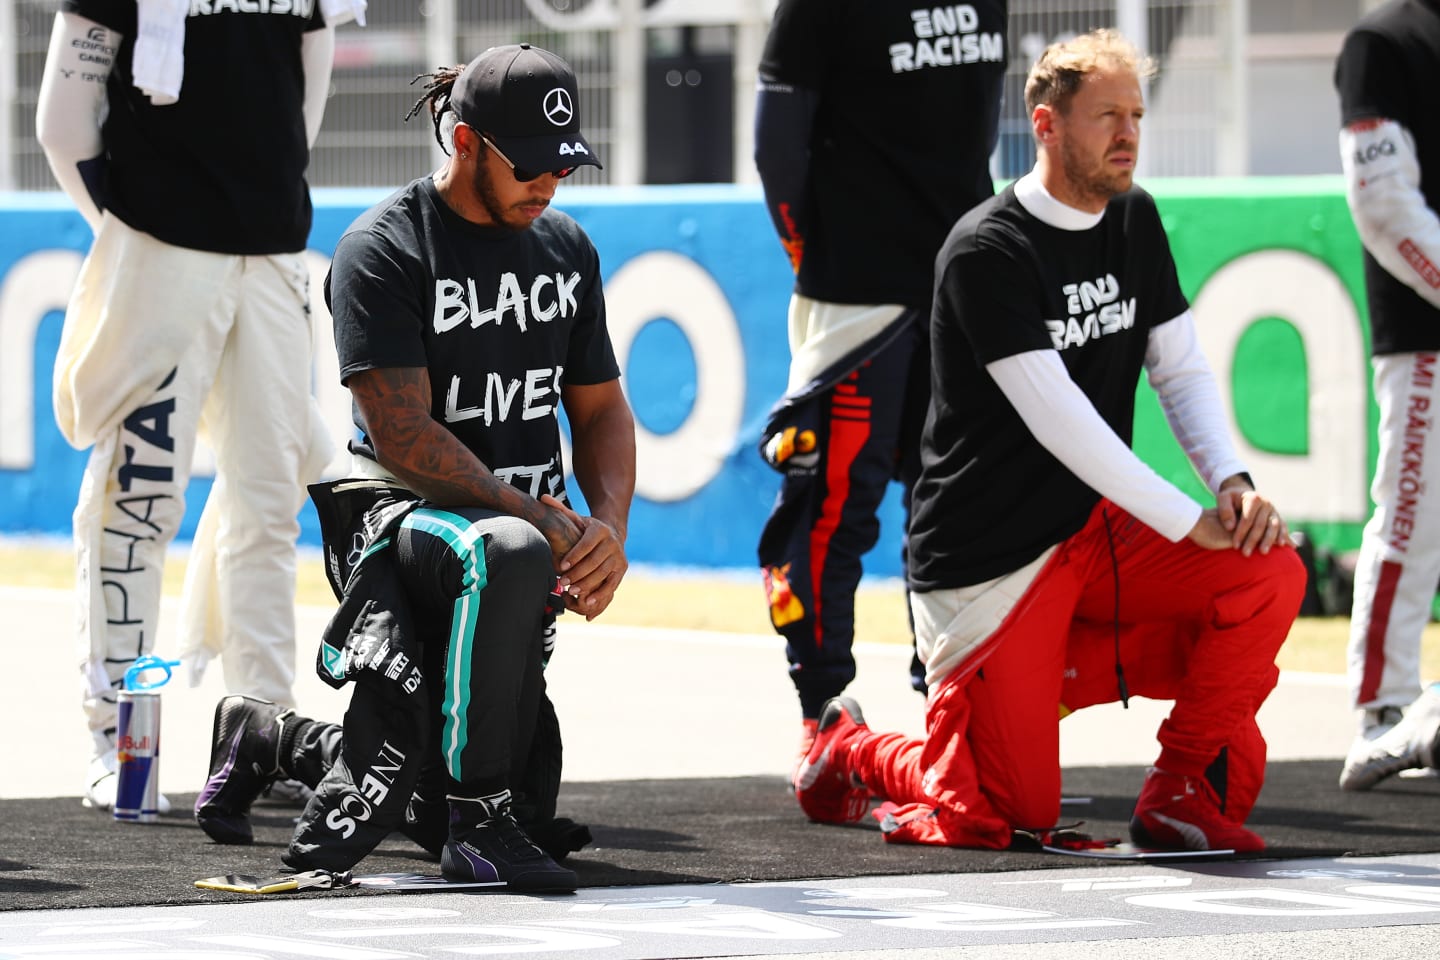 BARCELONA, SPAIN - AUGUST 16: Lewis Hamilton of Great Britain and Mercedes GP takes a knee on the